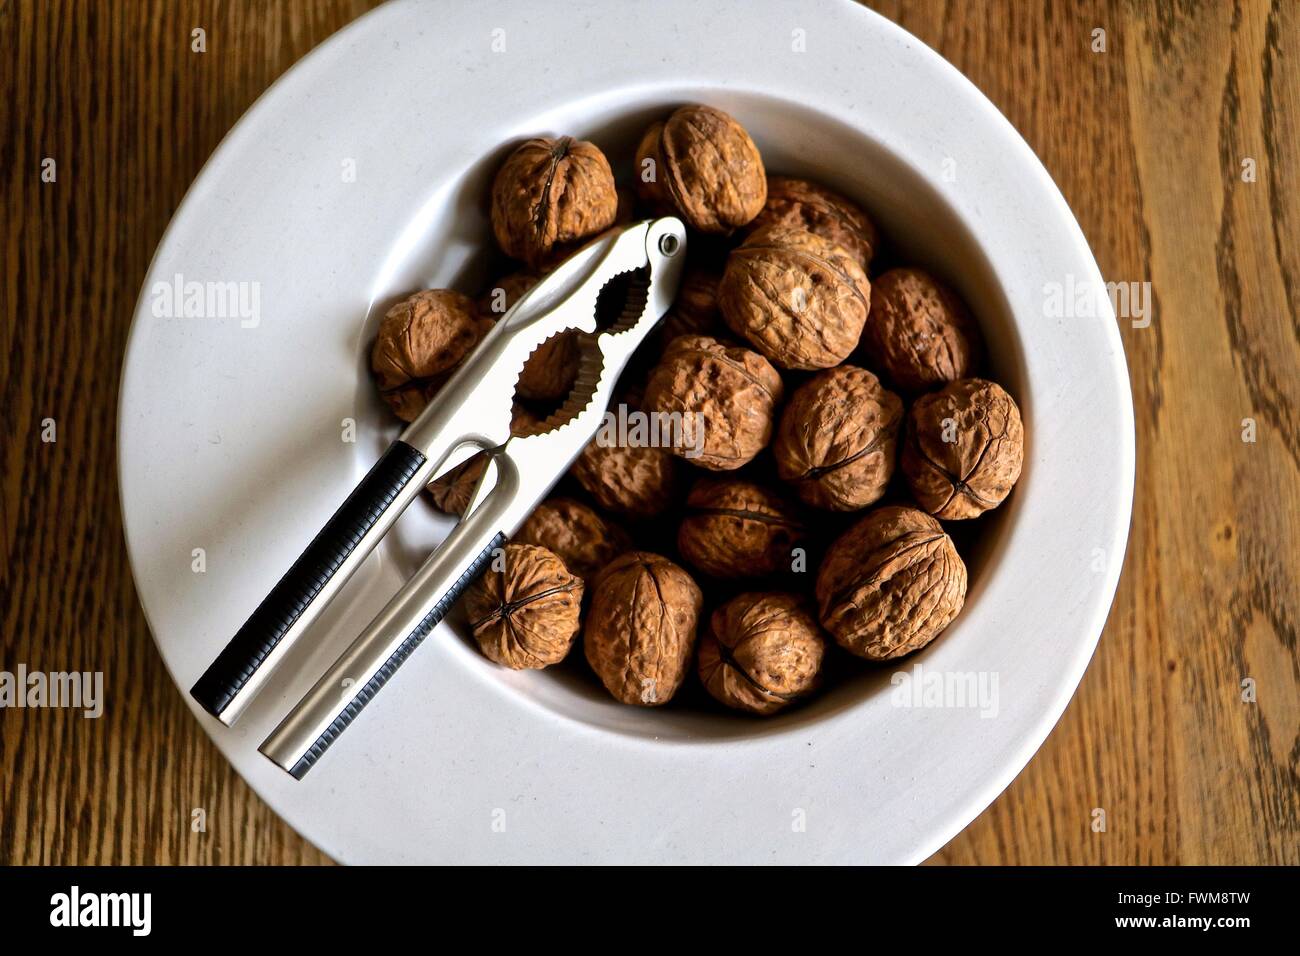 High Angle View Of Walnut And Nut Cracker In Plate Stock Photo